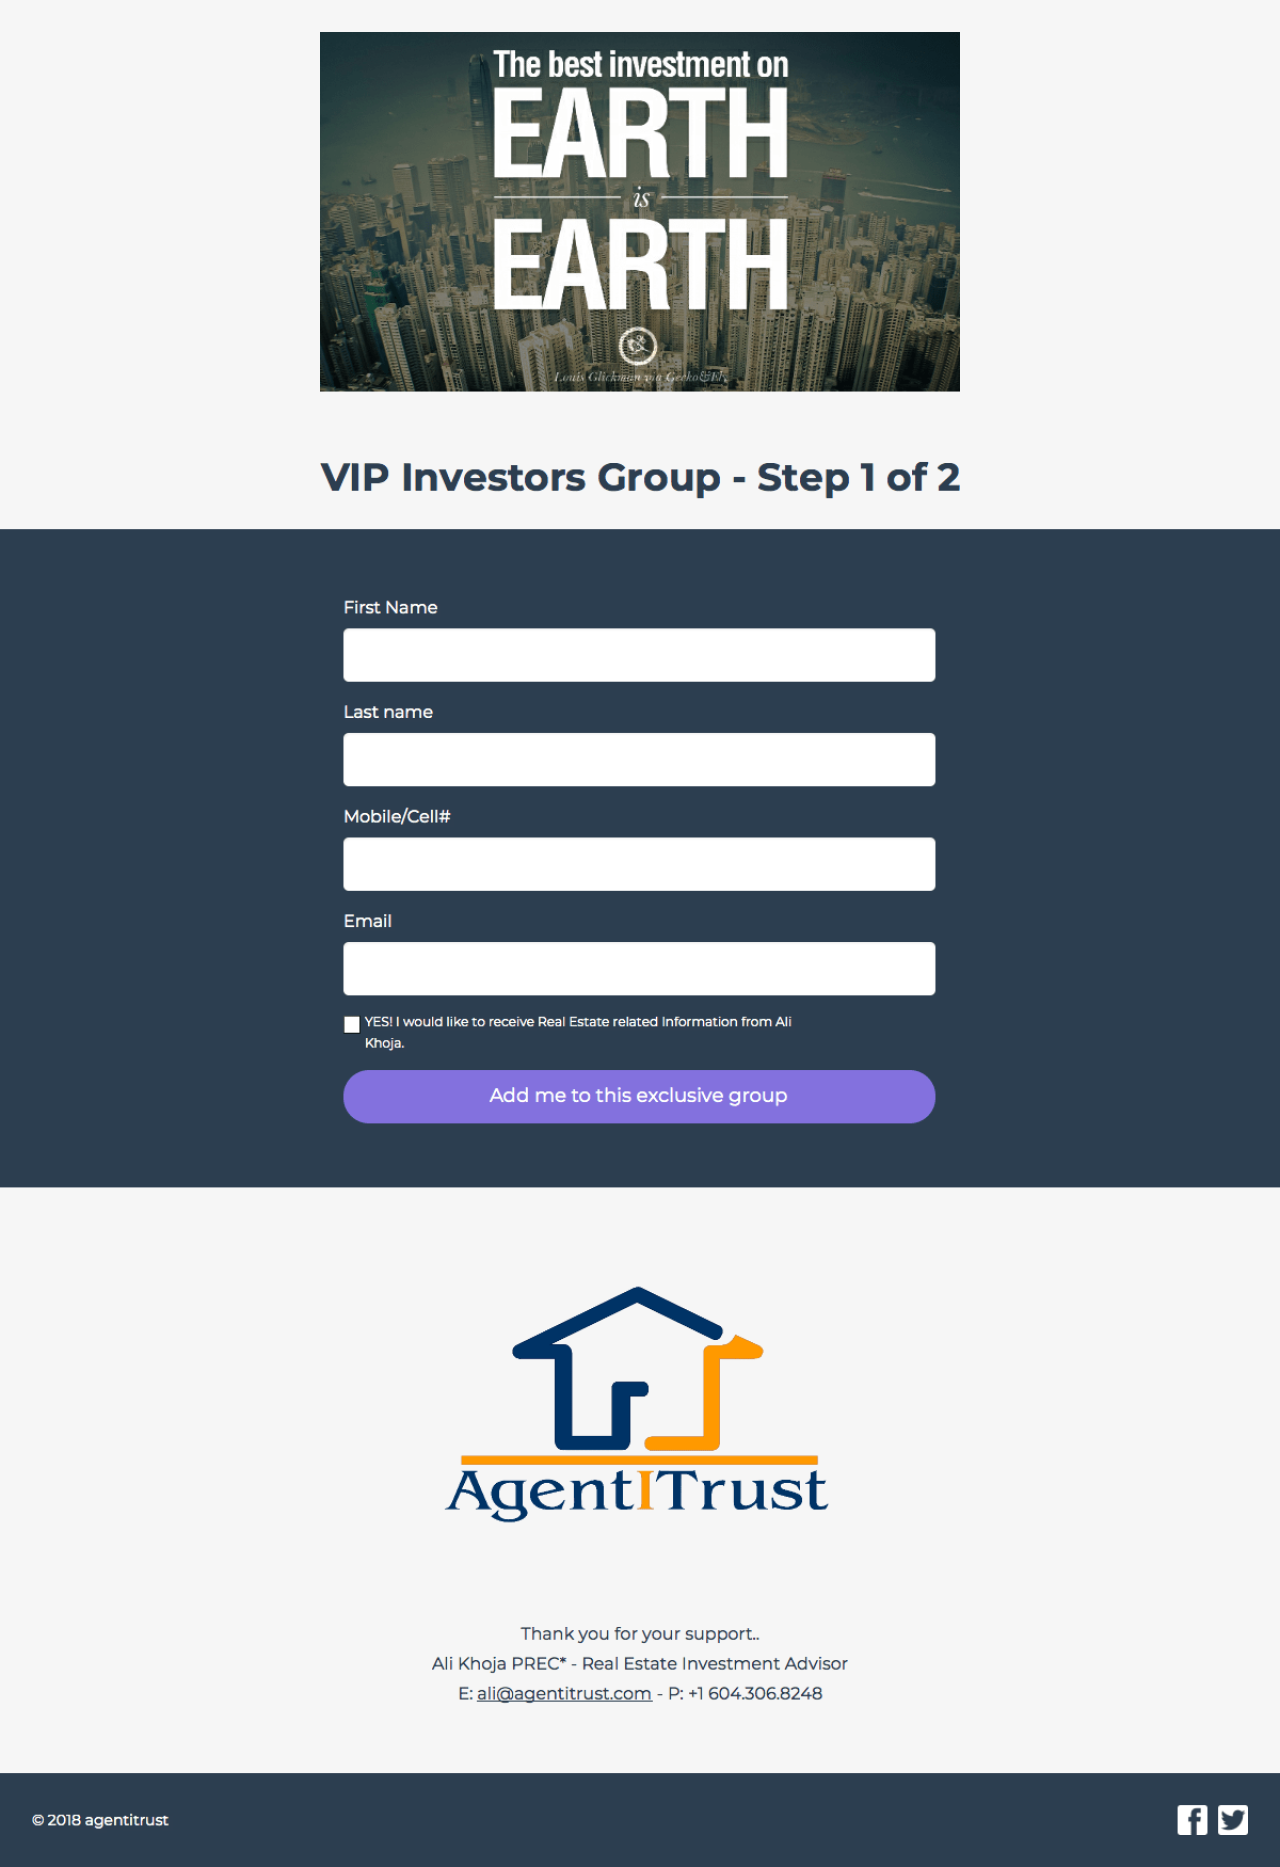 Ali Khoja PREC* - VIP Investors Group - Step 1 of 2 example - Made with MailerLite